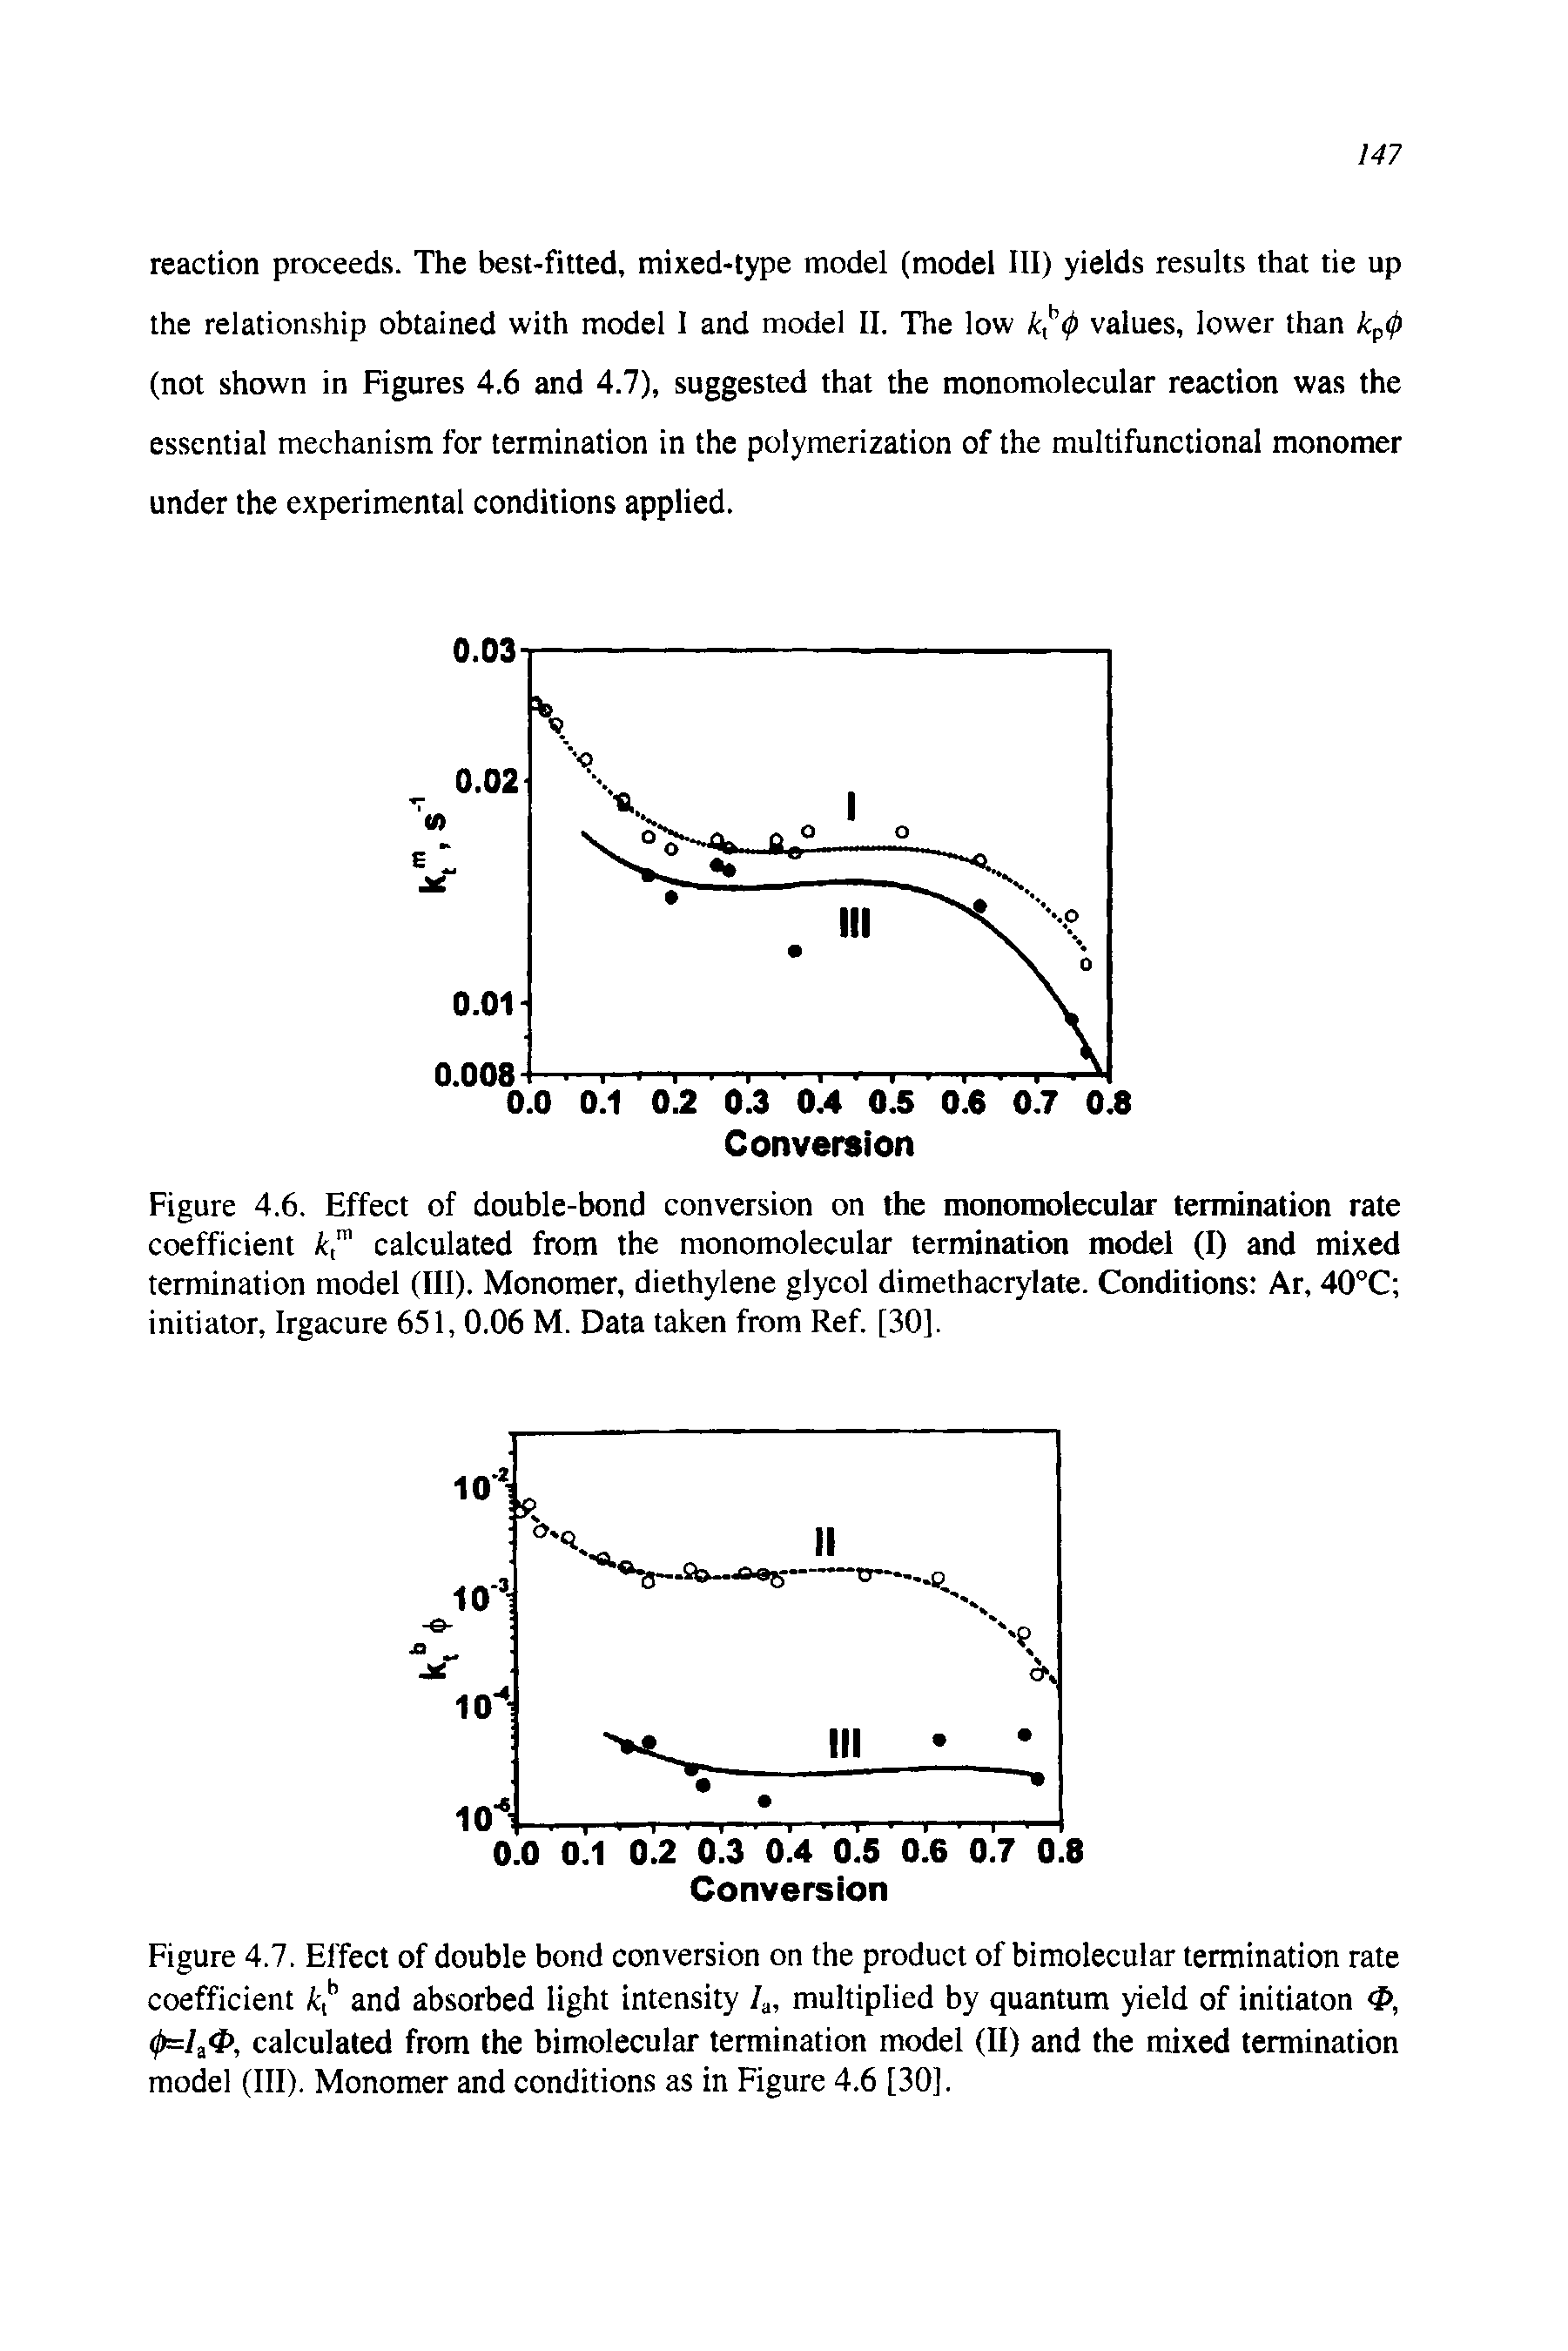 Figure 4.7. Effect of double bond conversion on the product of bimolecular termination rate coefficient and absorbed light intensity multiplied by quantum yield of initiaton <P, (I>=h4>, calculated from the bimolecular termination model (II) and the mixed termination model (III). Monomer and conditions as in Figure 4.6 [30].